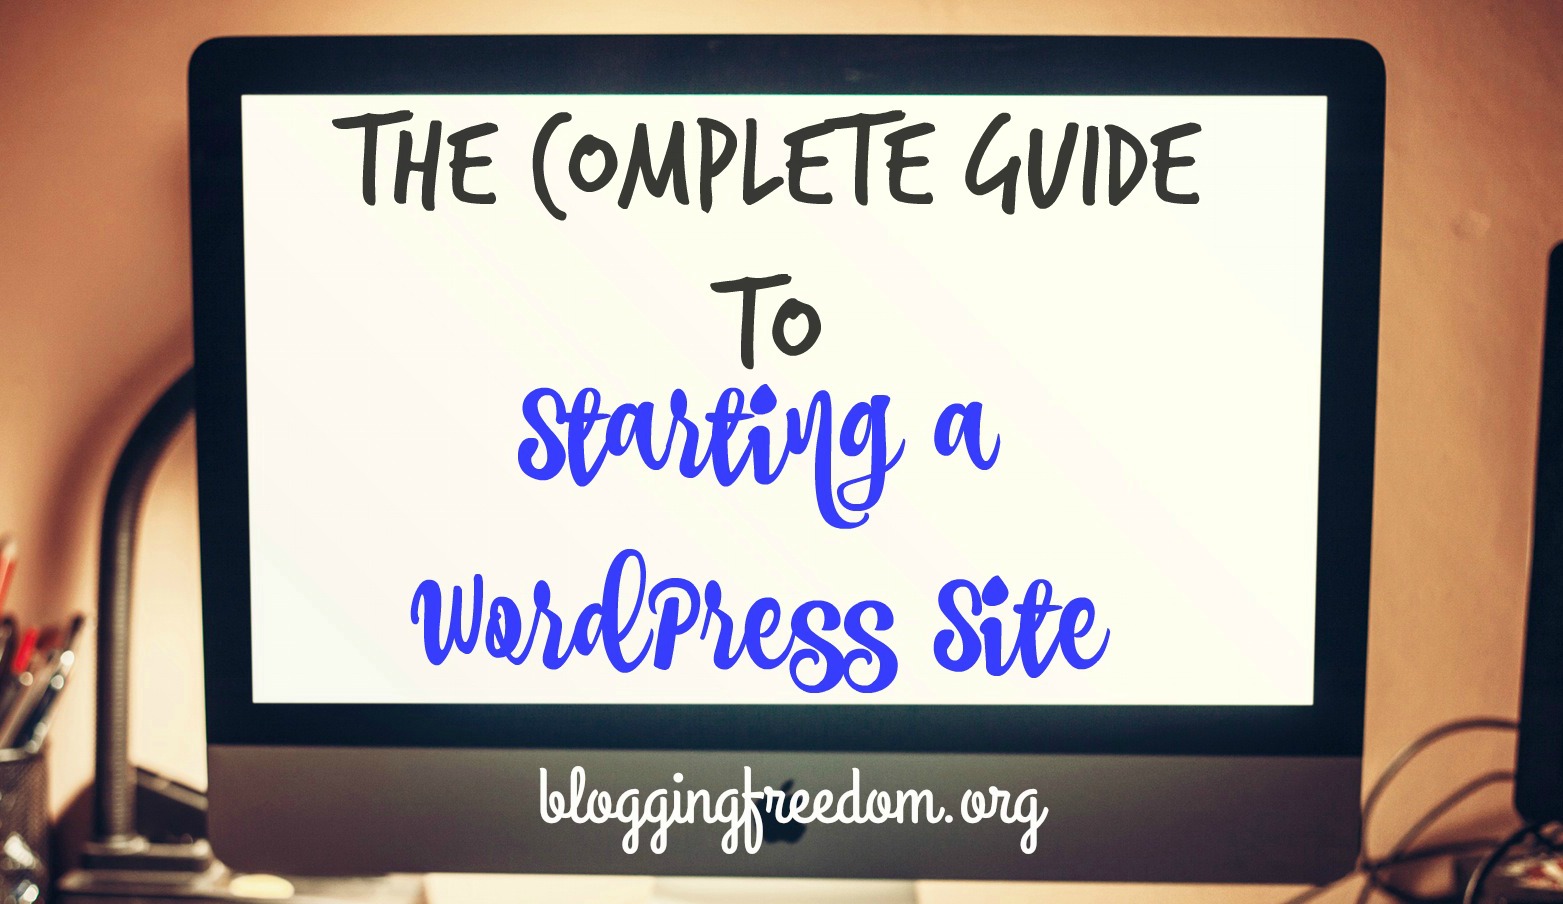 The Complete Guide To Starting A WordPress Site